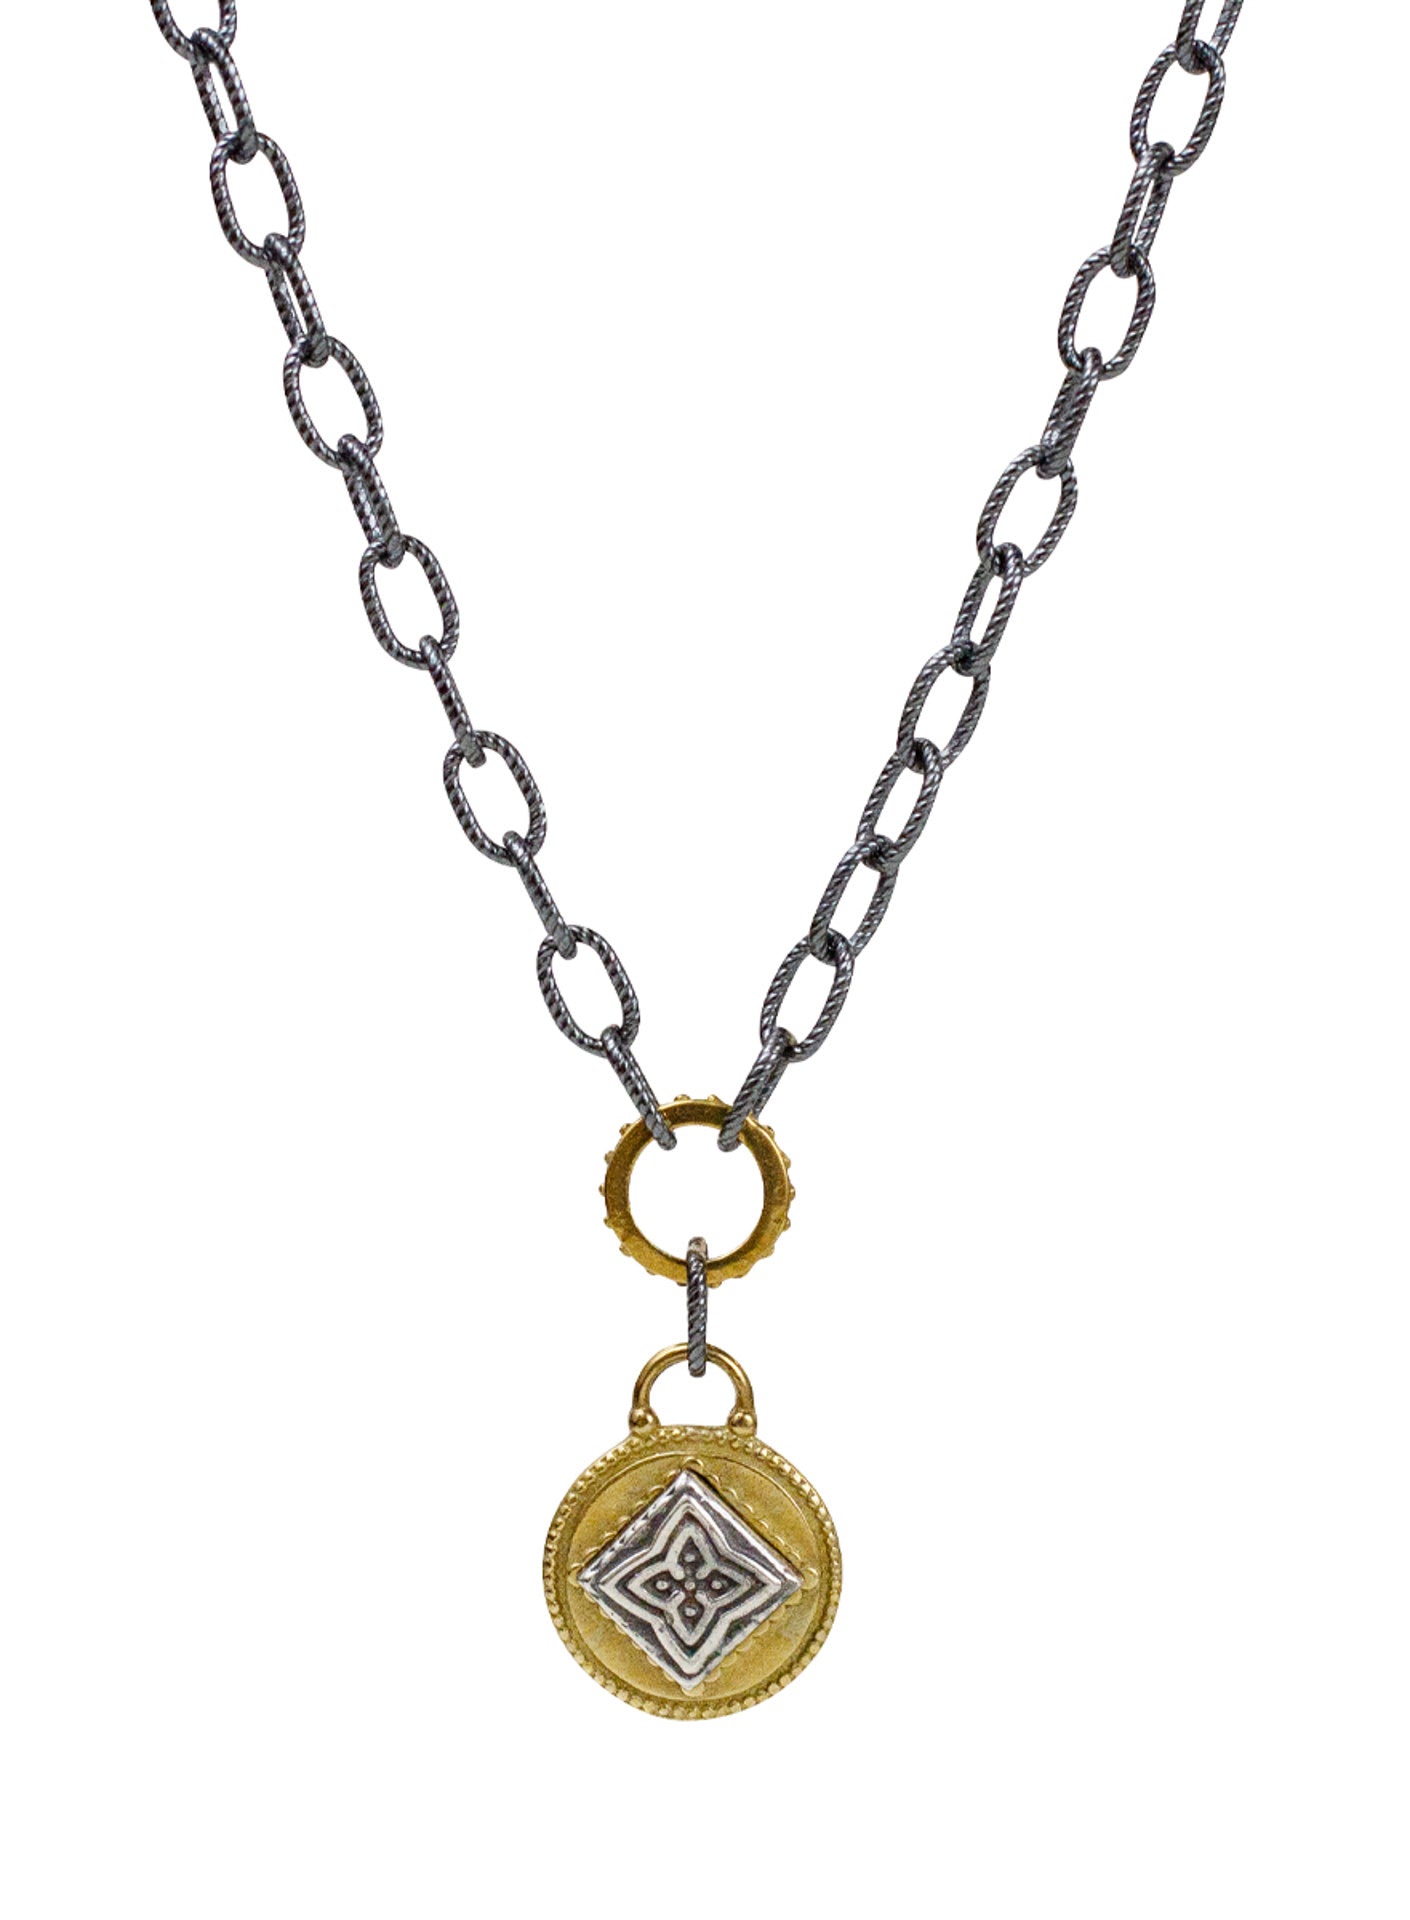 Channel Necklace - Siddha "raise your frequency"